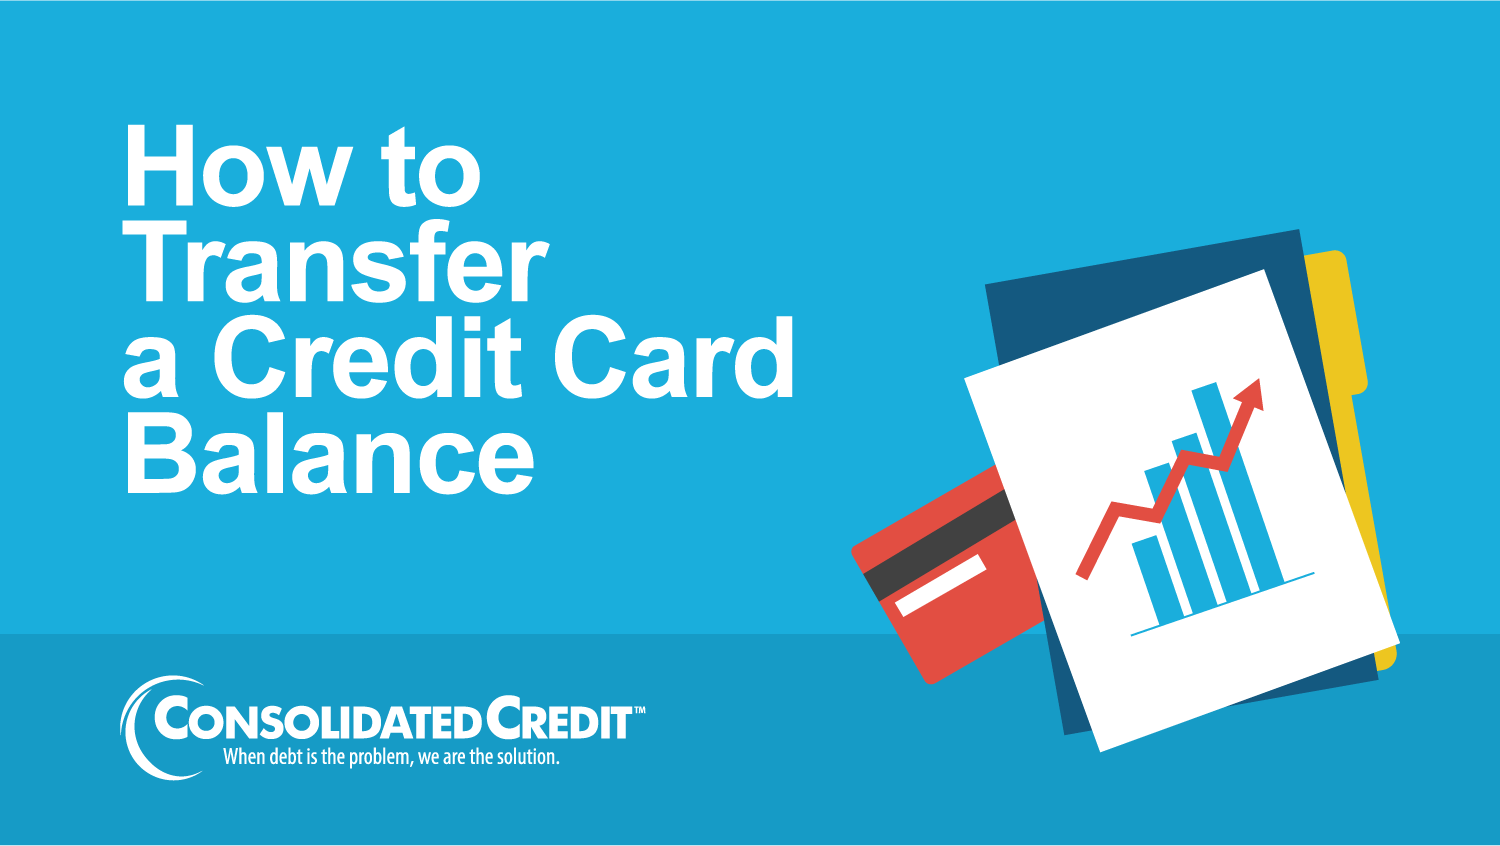 How to Transfer a Credit Card Balance